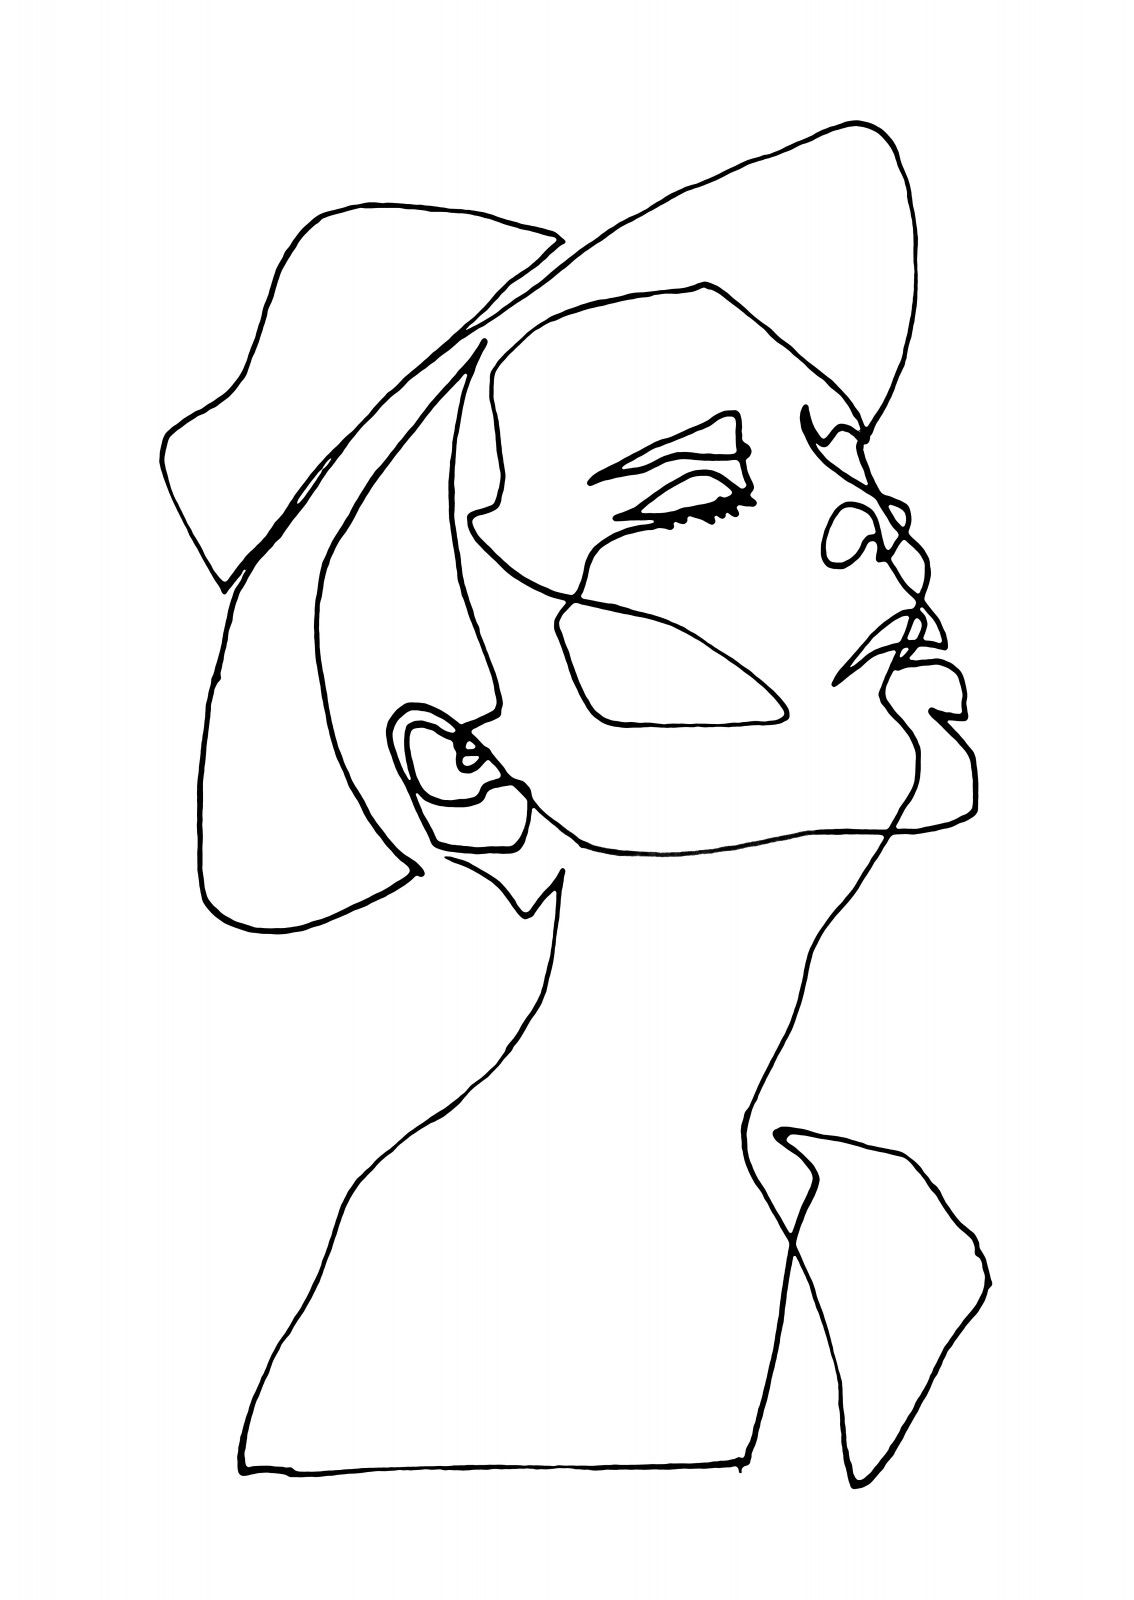 Simple One Line Face Drawing Hand Drawn Sketch